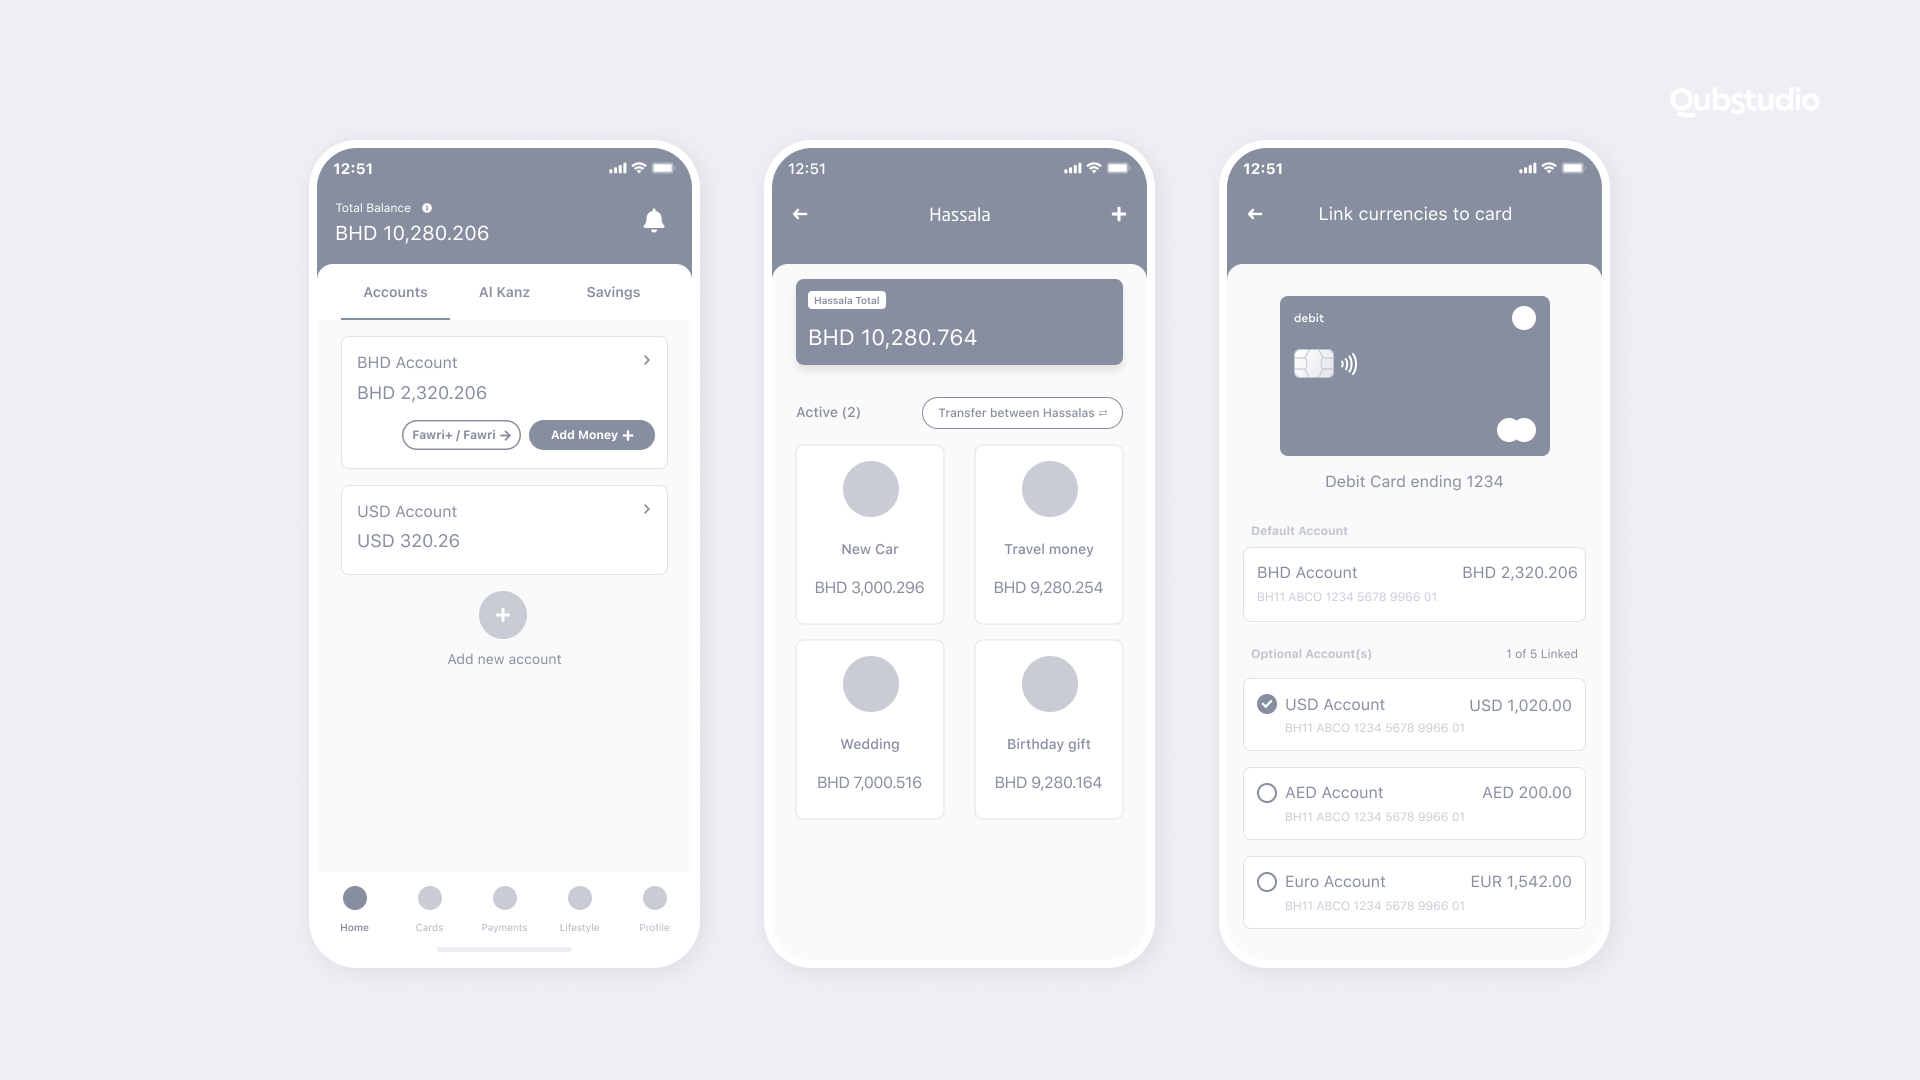 How to Create an Exceptional Financial App Design - Wireframes (2) (1) - Qubstudio